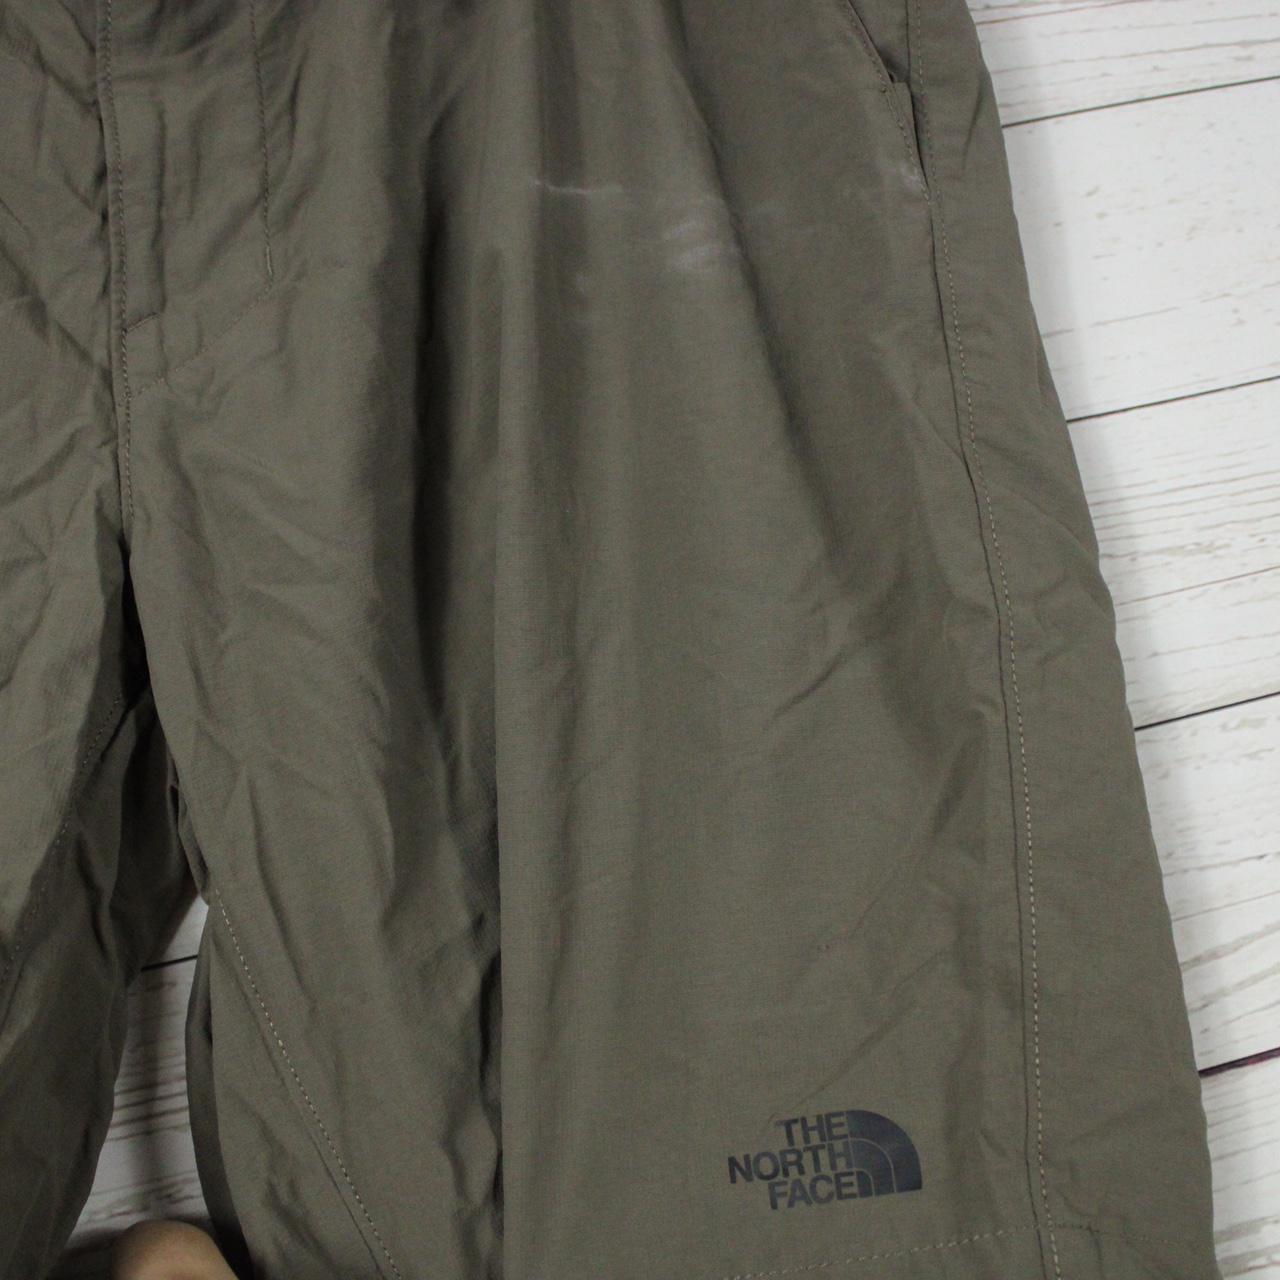 The North Face Men's Green Shorts (3)